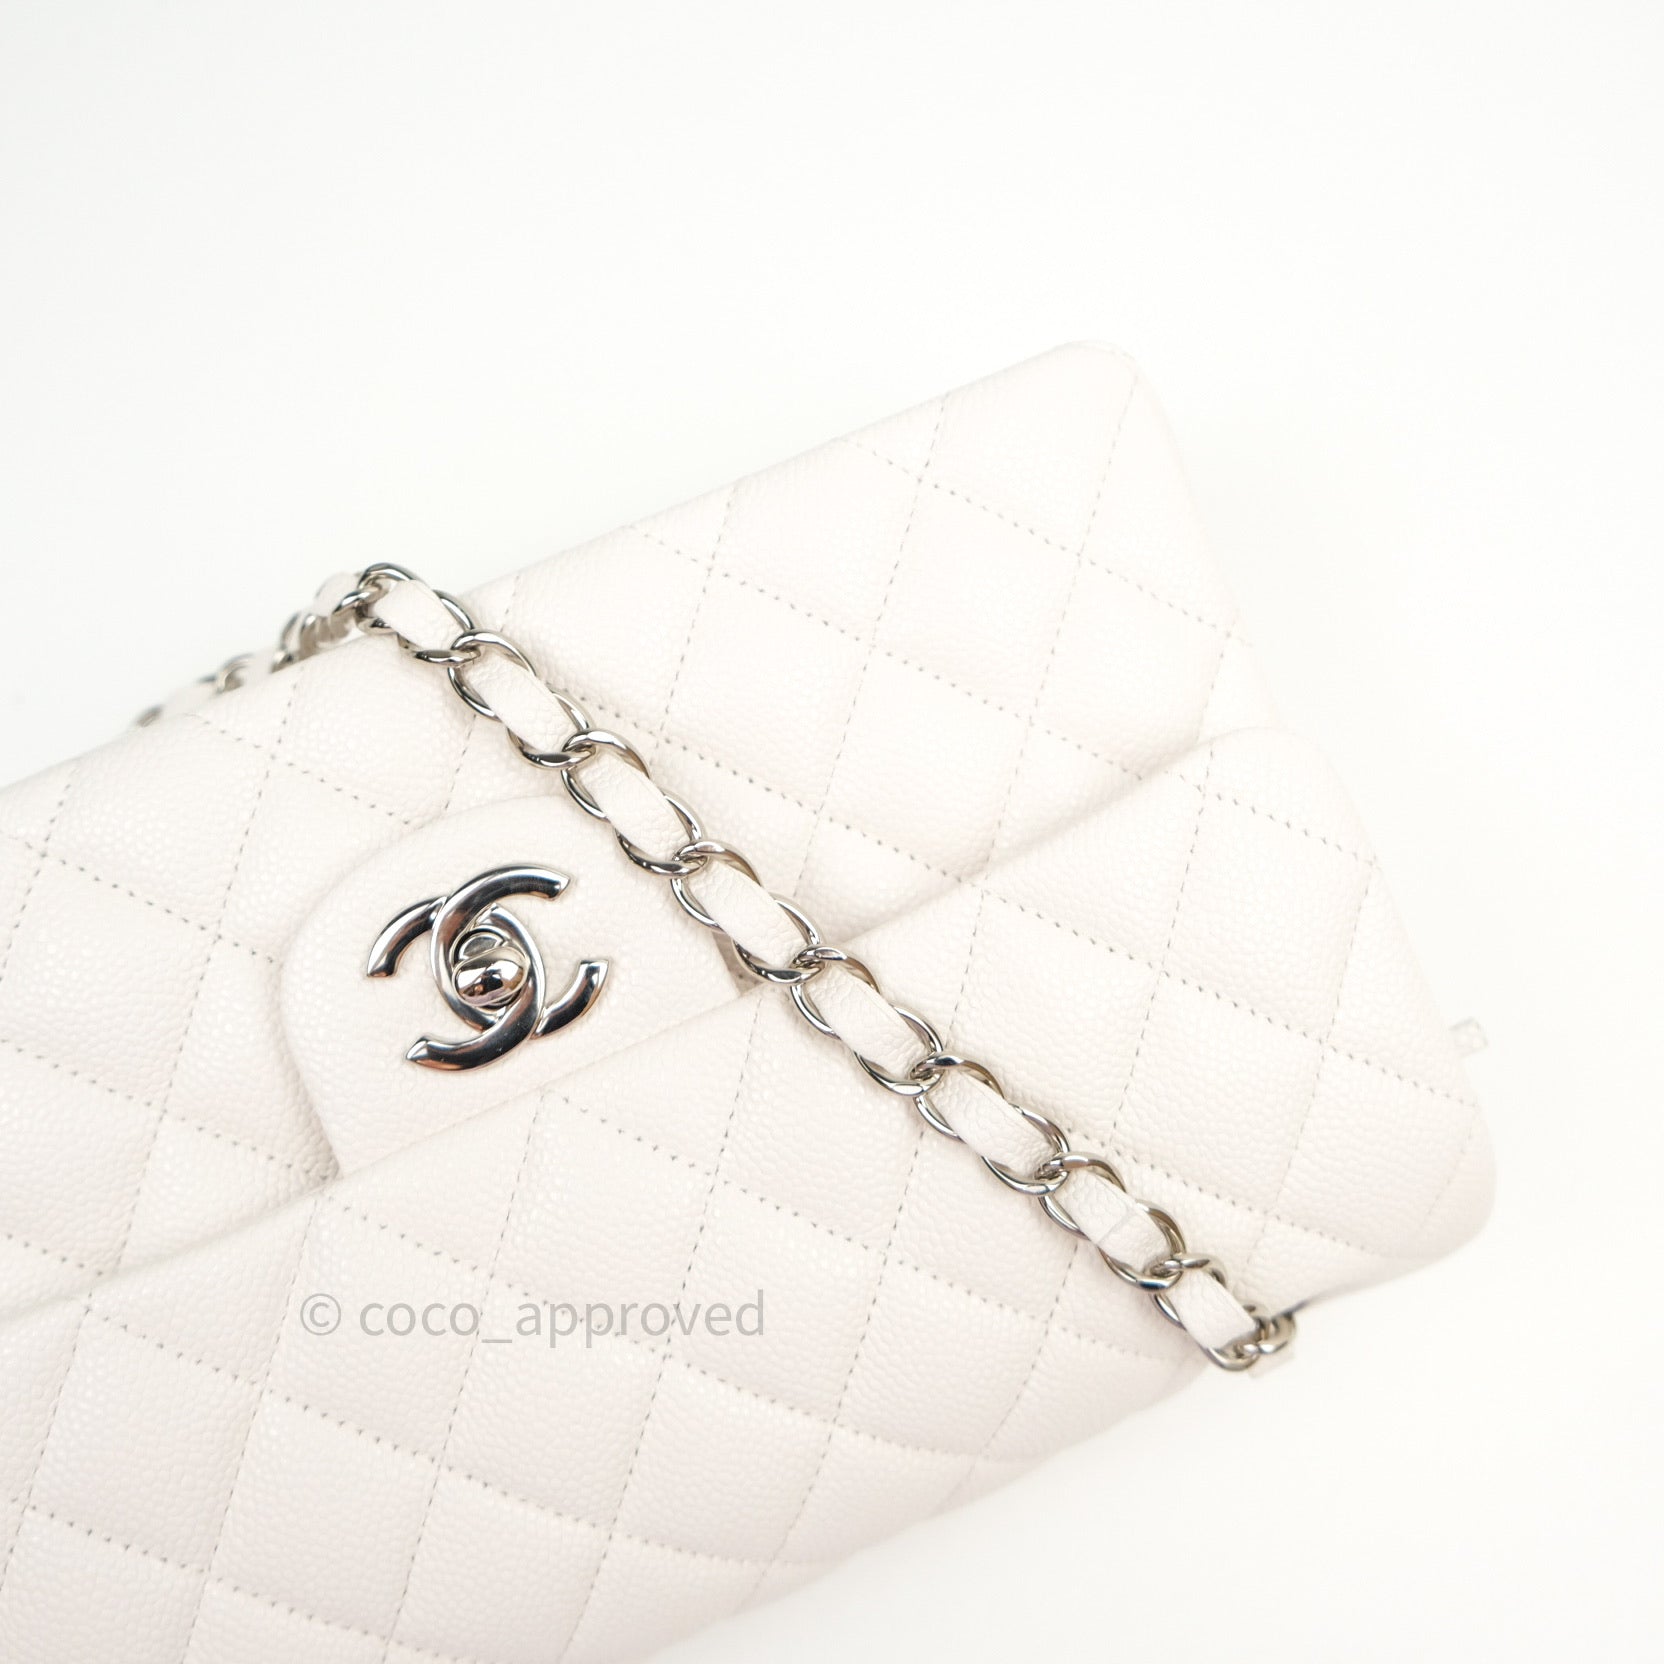 Chanel Sac Class Rabat Caviar Double Flap Silver Hardware (off white)  *Authentic*